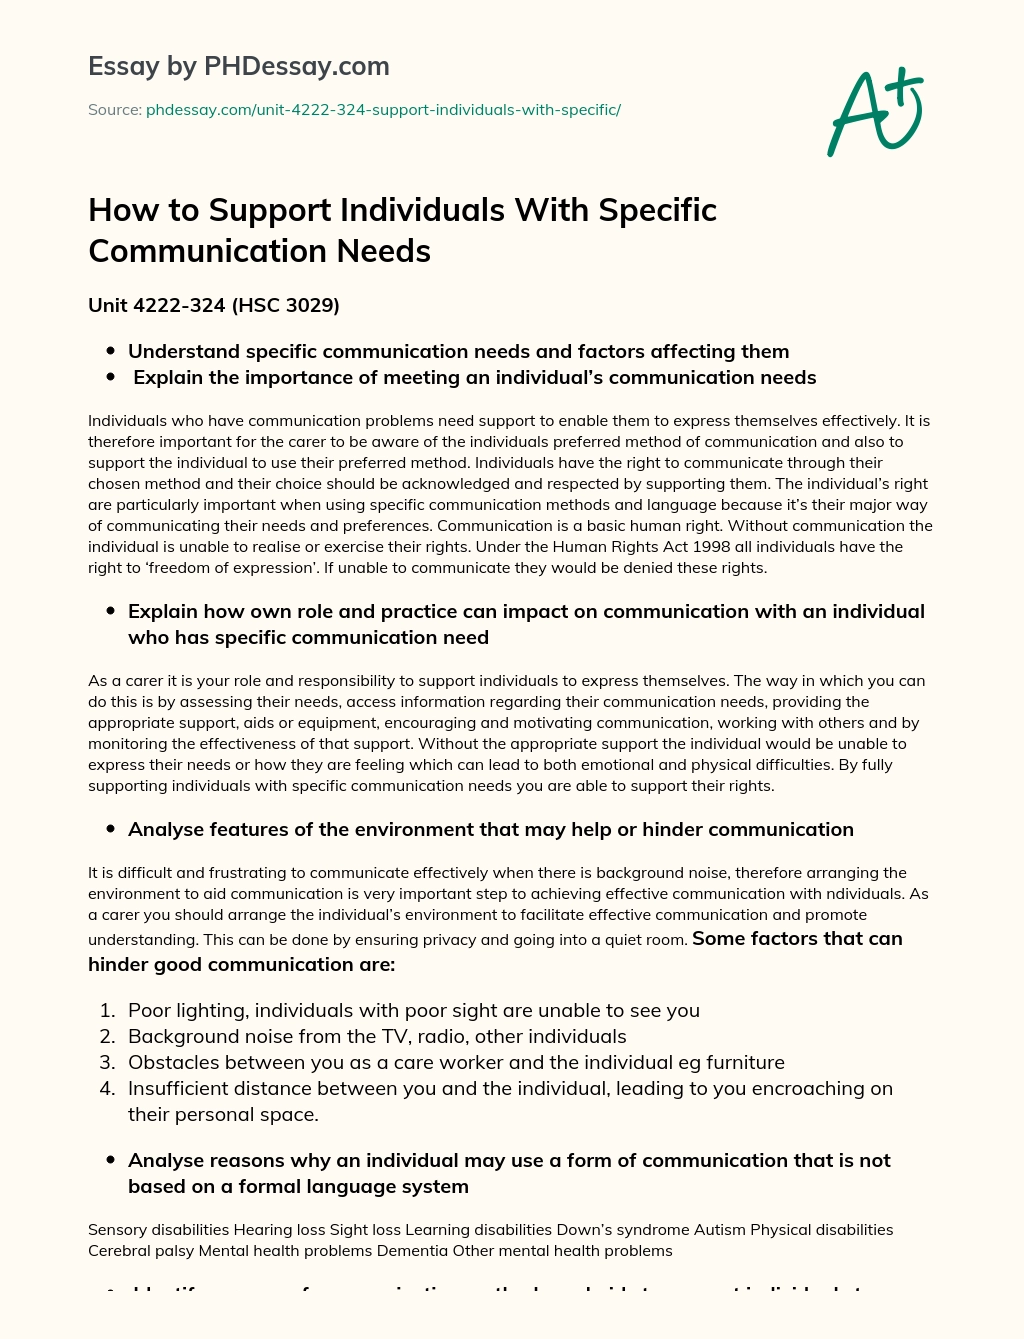 How to Support Individuals With Specific Communication Needs essay